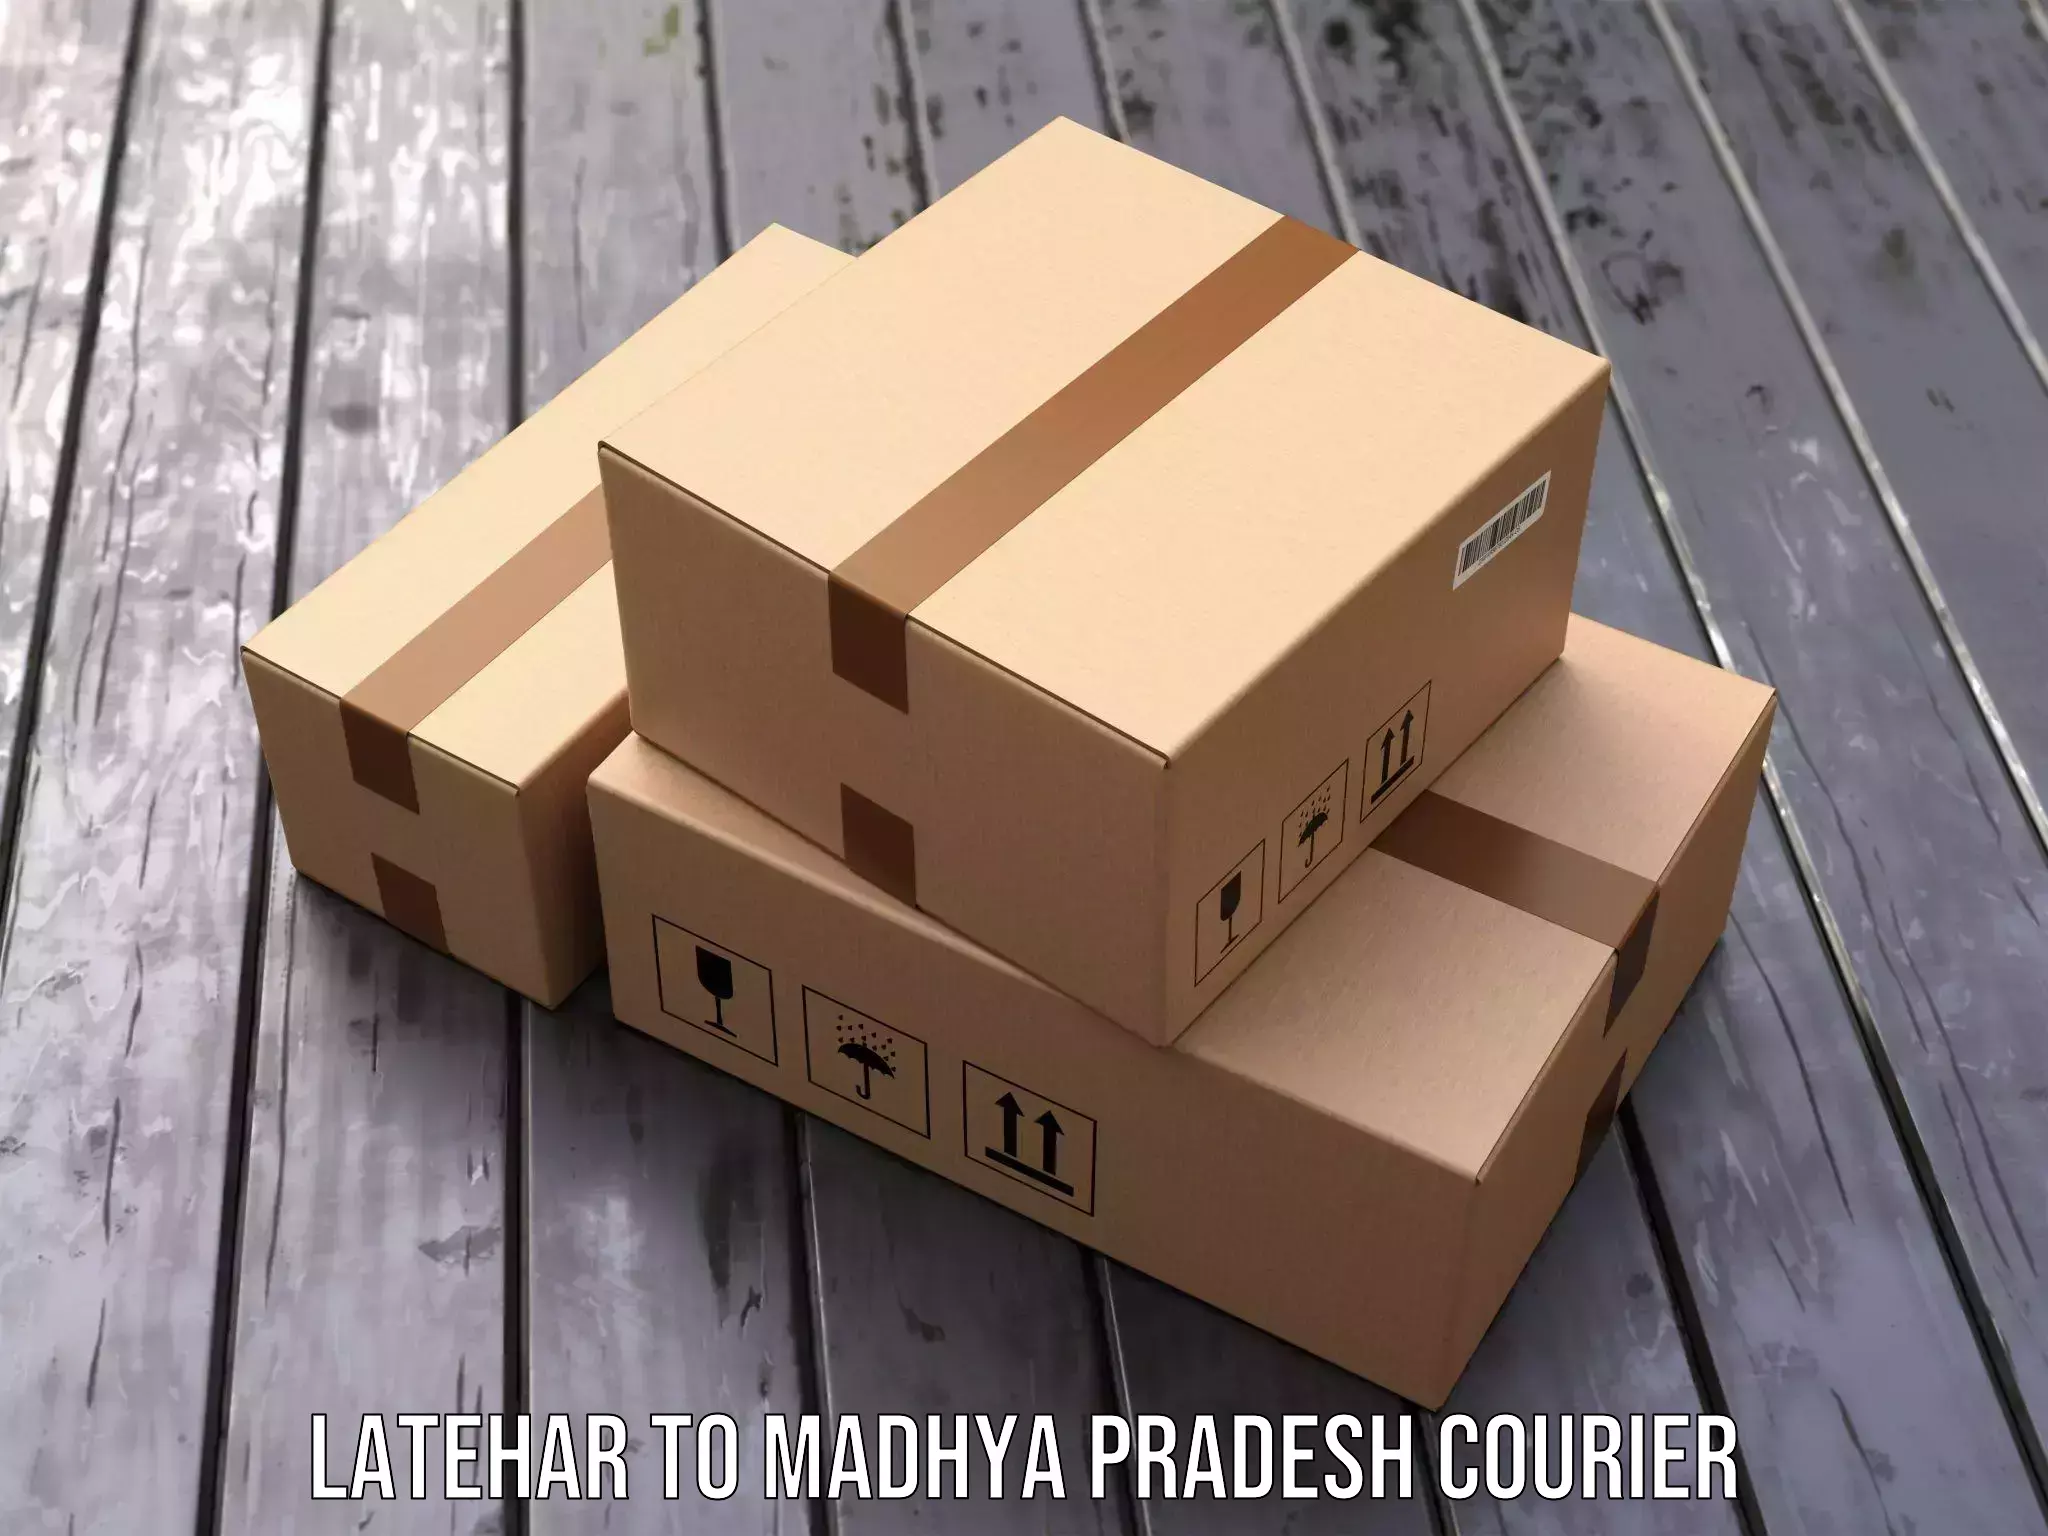 Postal and courier services Latehar to Rajgarh